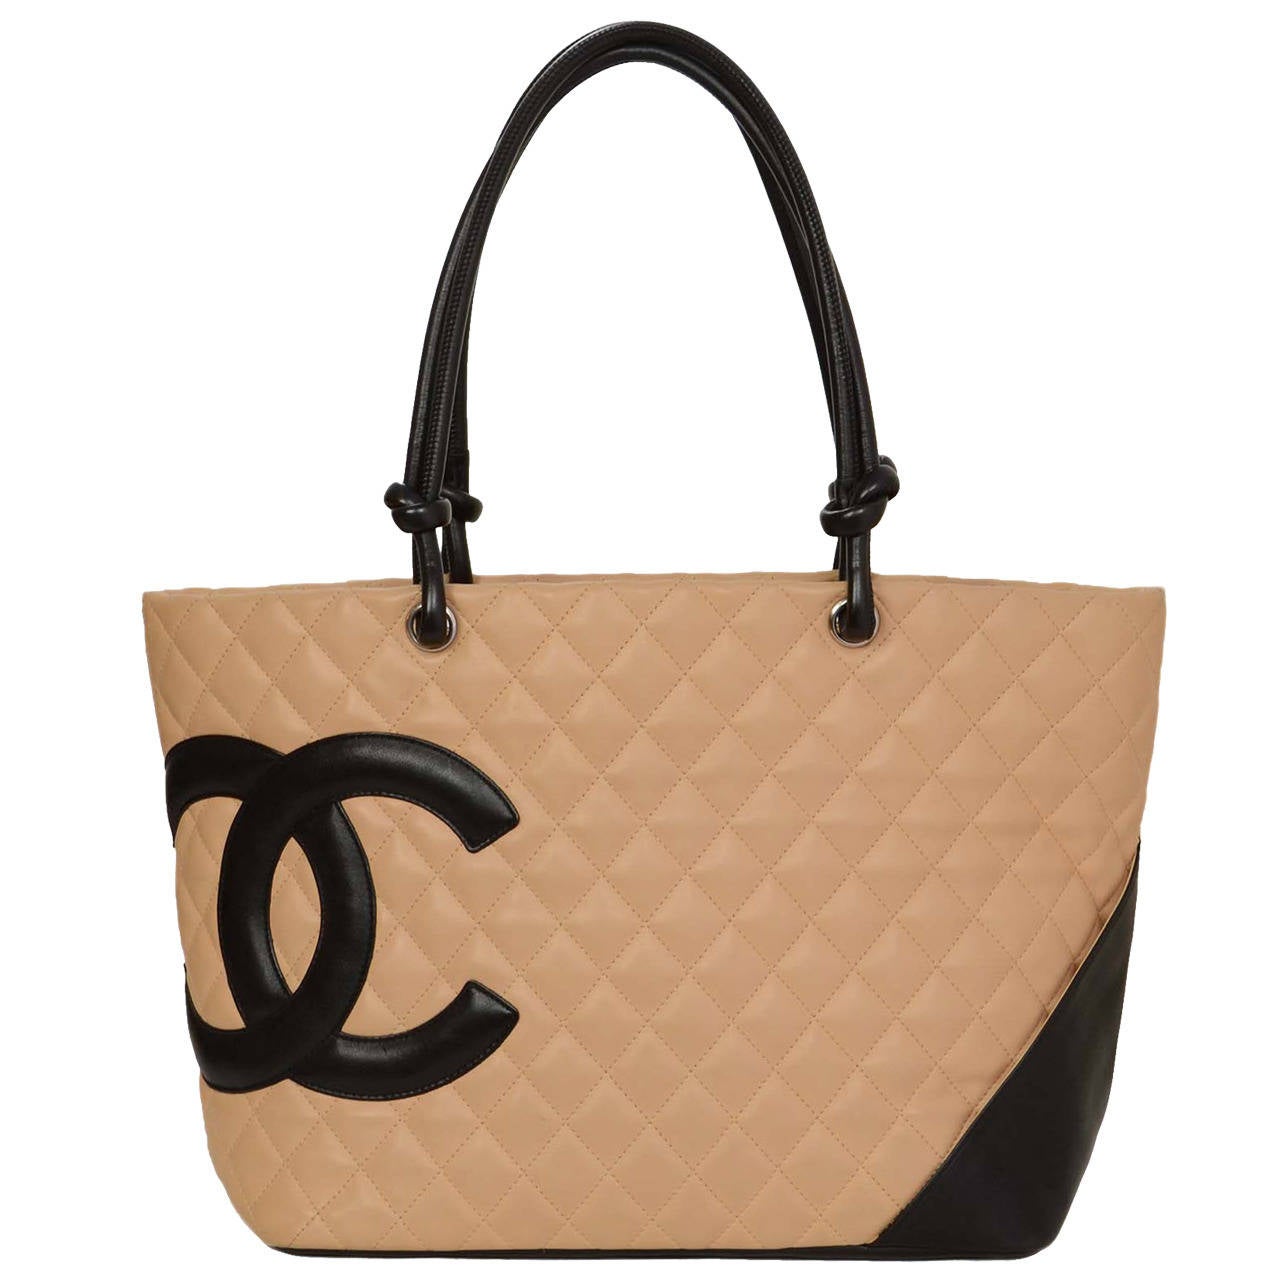 CHANEL Tan/Black Quilted Leather Large Cambon Tote Bag rt $2,250 at 1stDibs